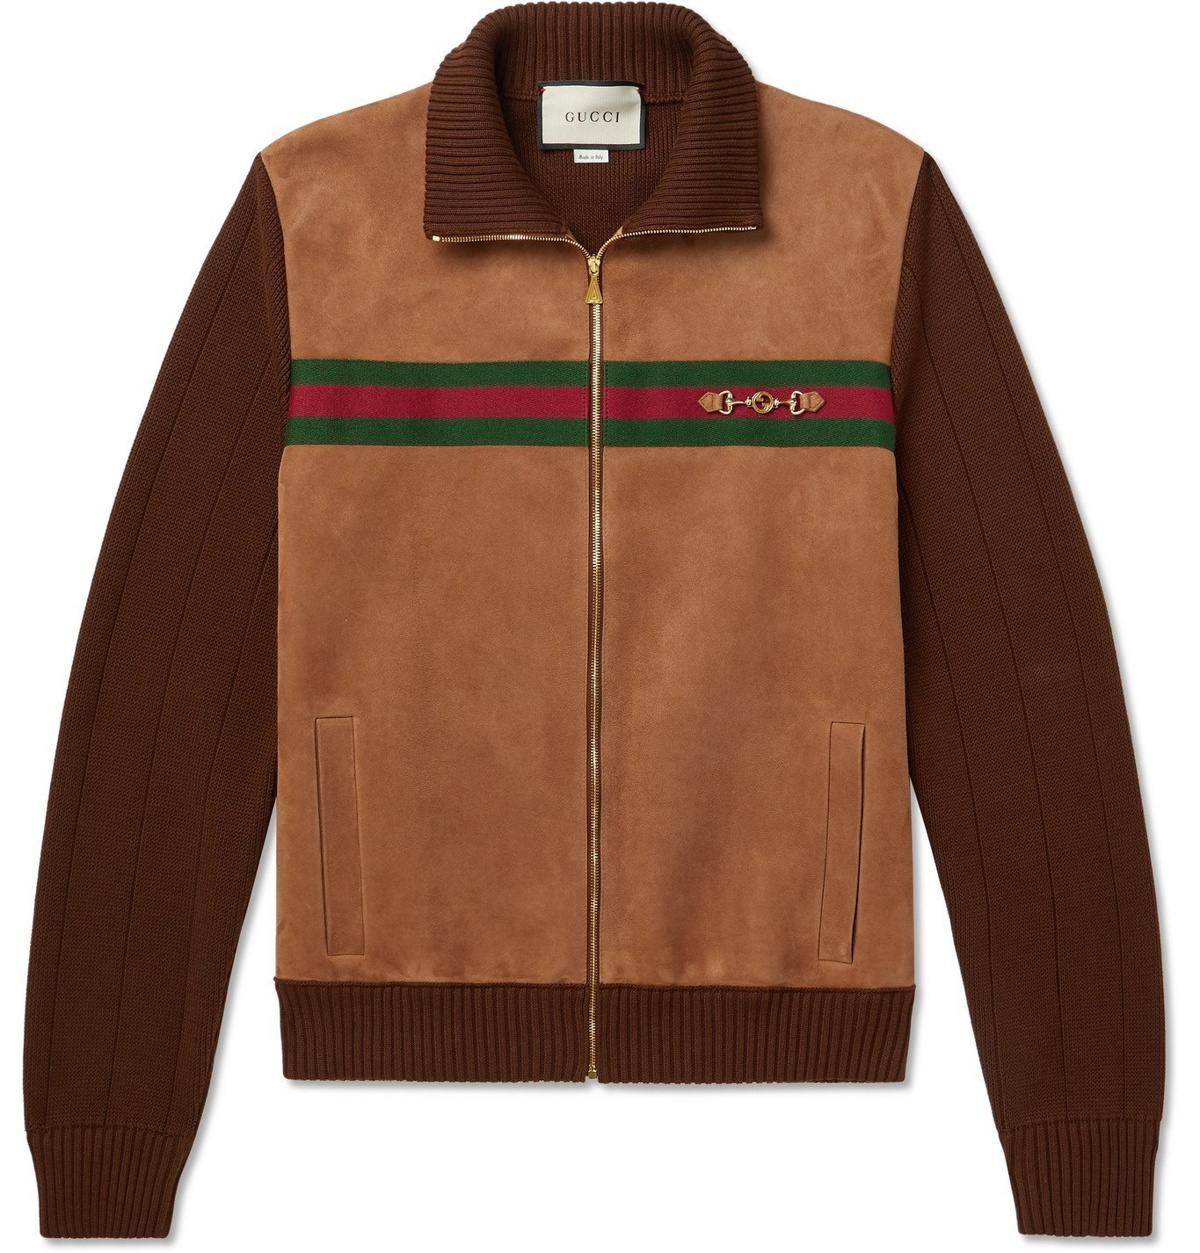 Gucci - Horsebit Webbing-Trimmed Suede and Cotton-Jersey Bomber Jacket -  Brown Gucci